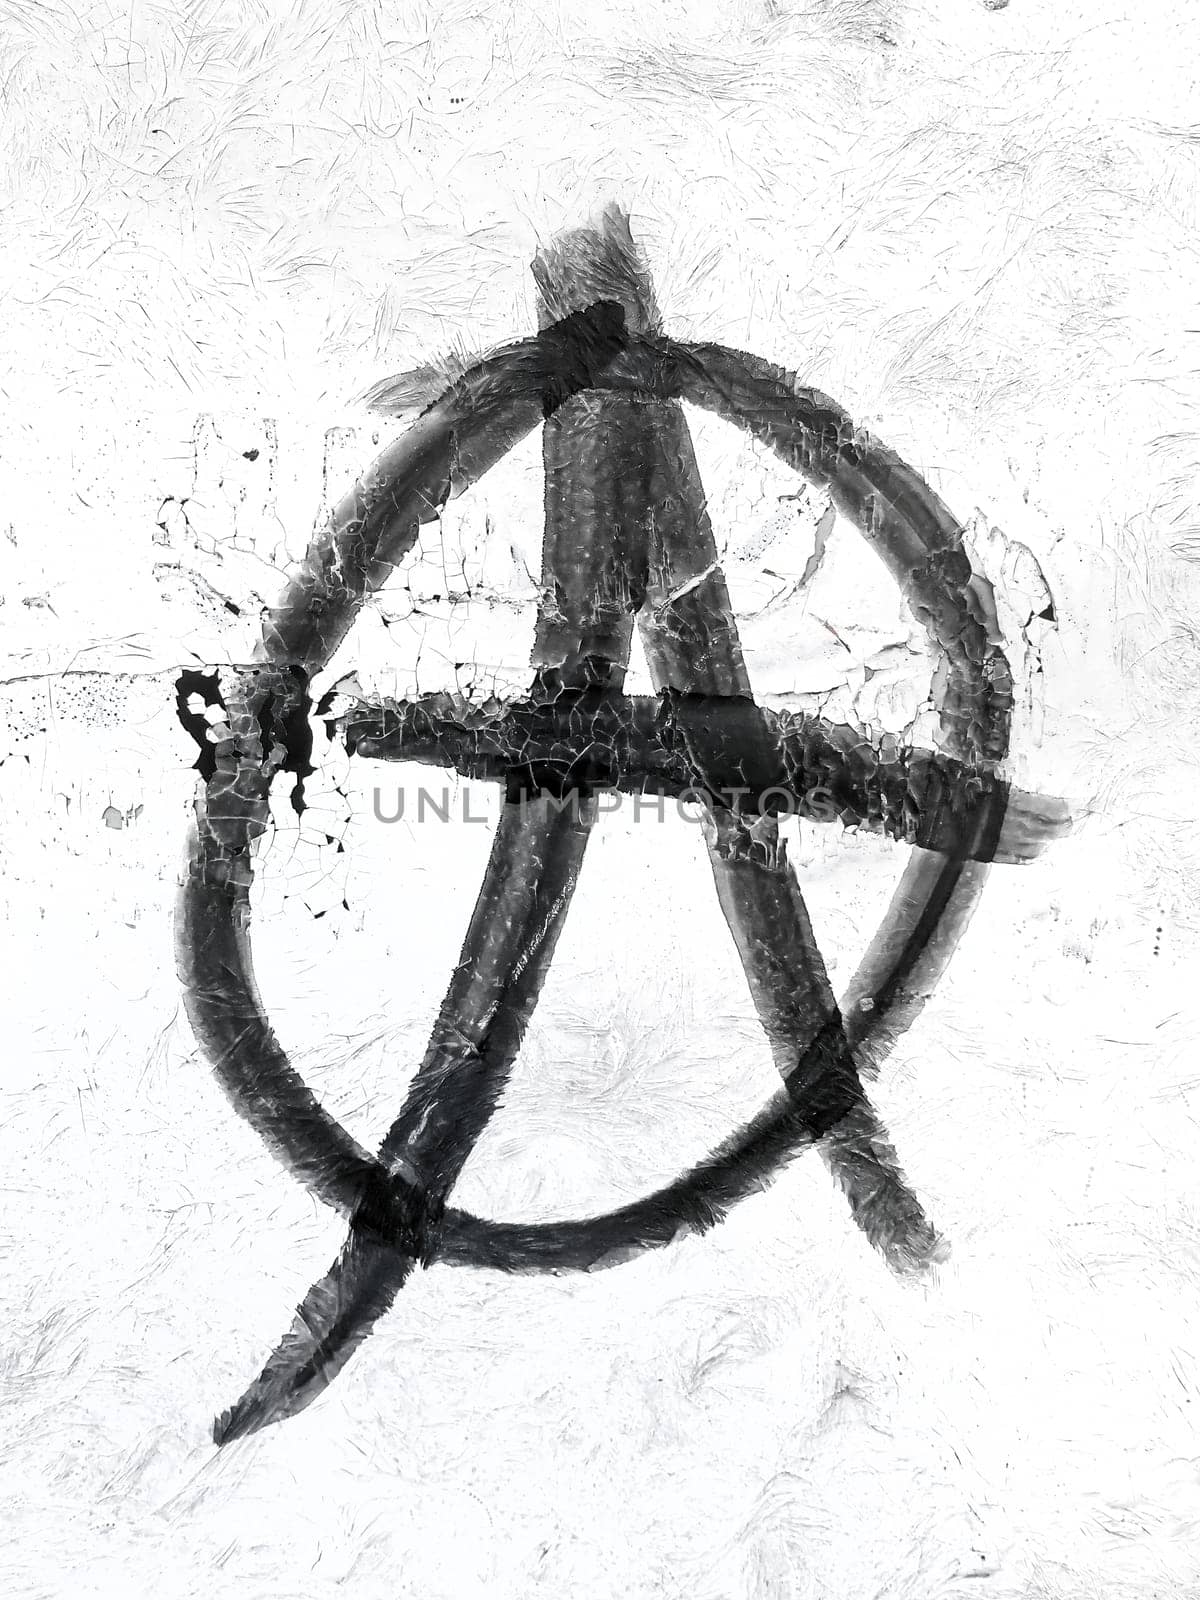 Anarchy symbol on wall. Ideal for textures, backgrounds and concepts.